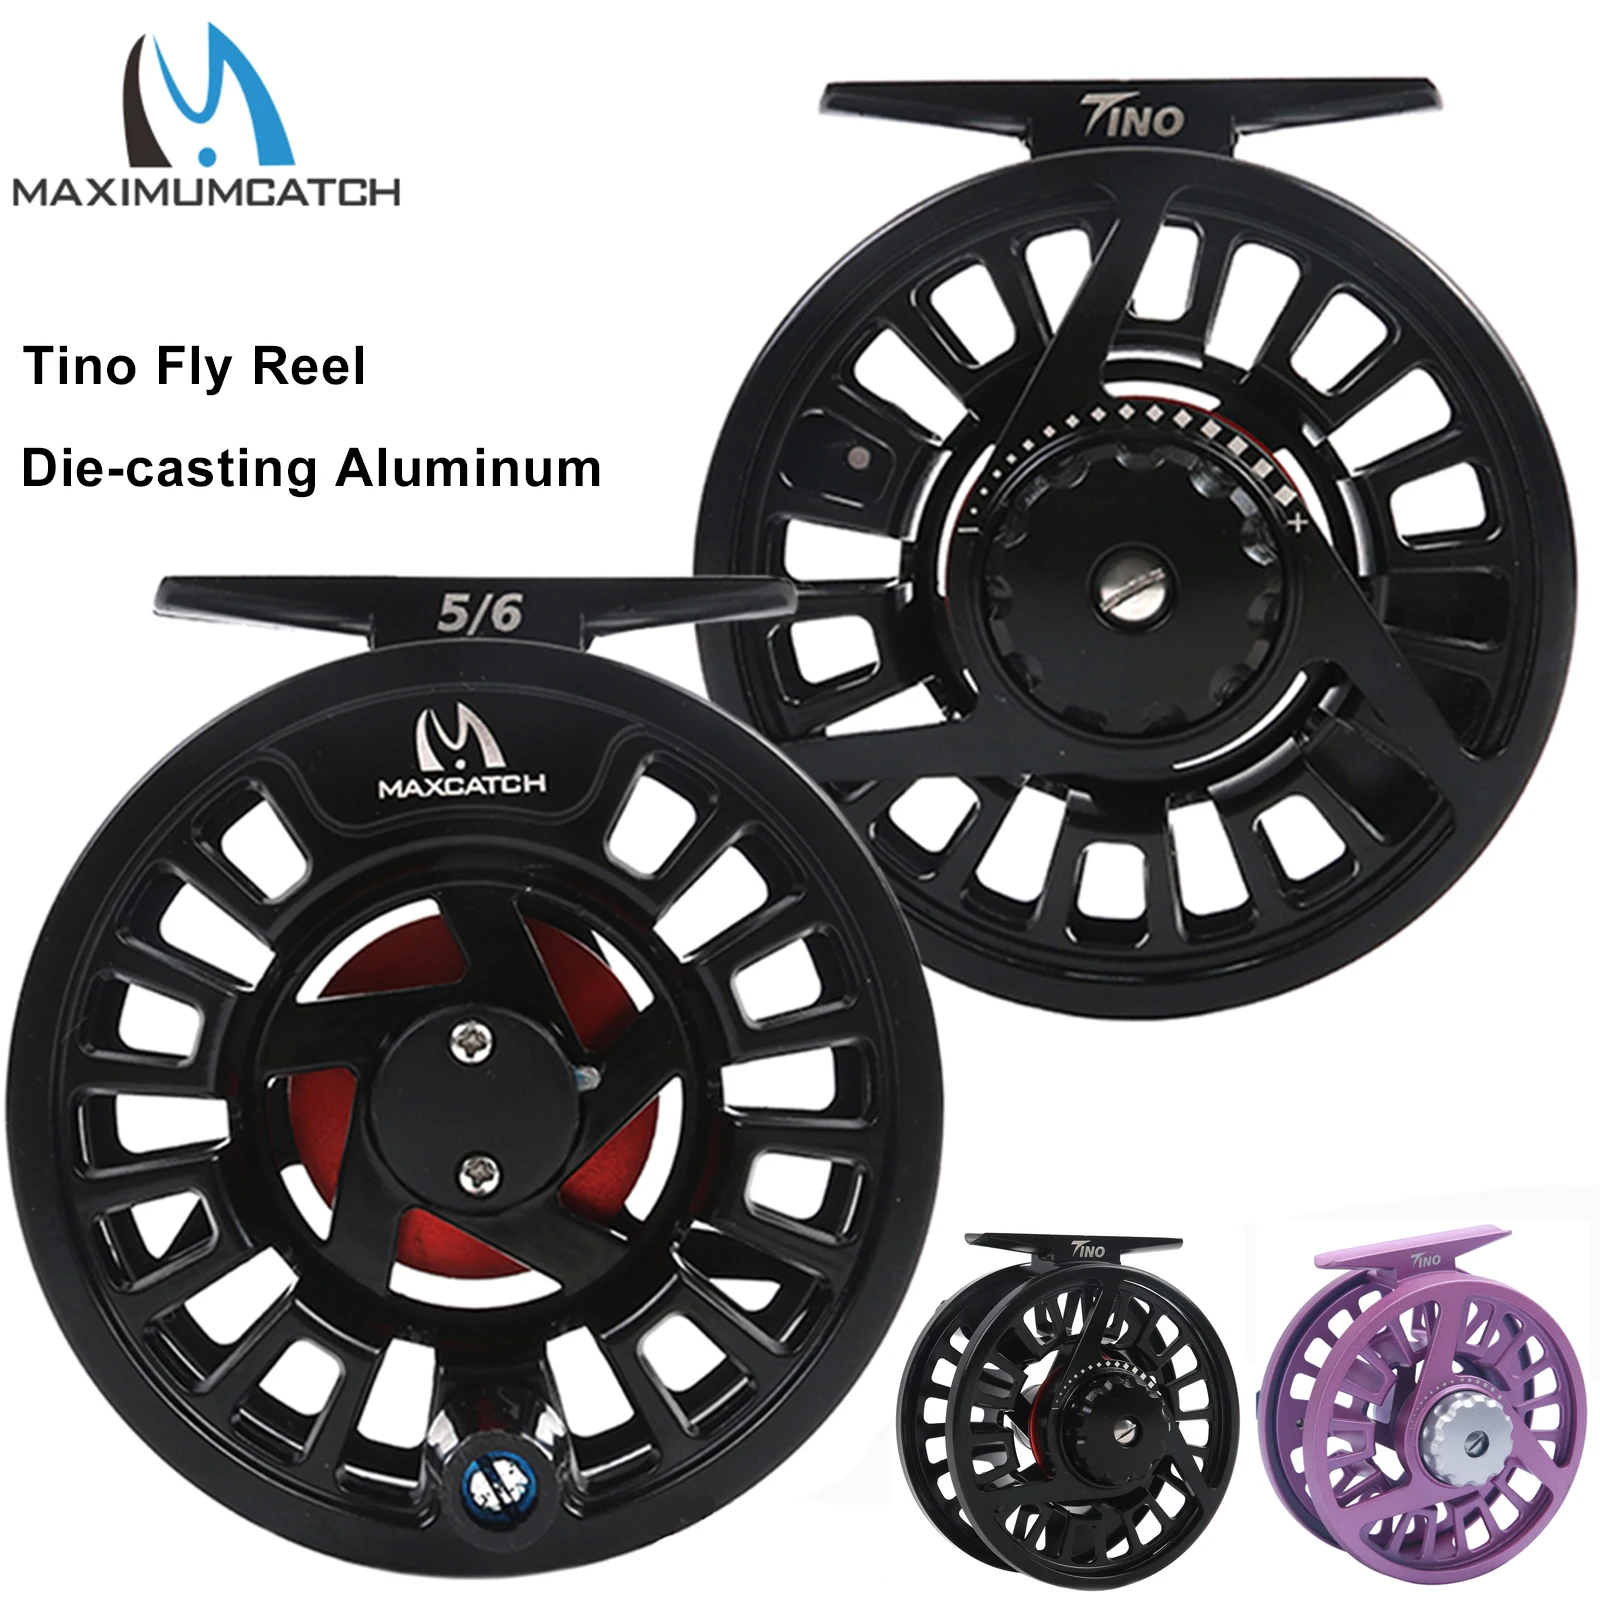 Maximumcatch Maxcatch Die-casting Aluminum Fly Fishing Reel Right and Left  Handed 3-8wt Black Color Fly Reel